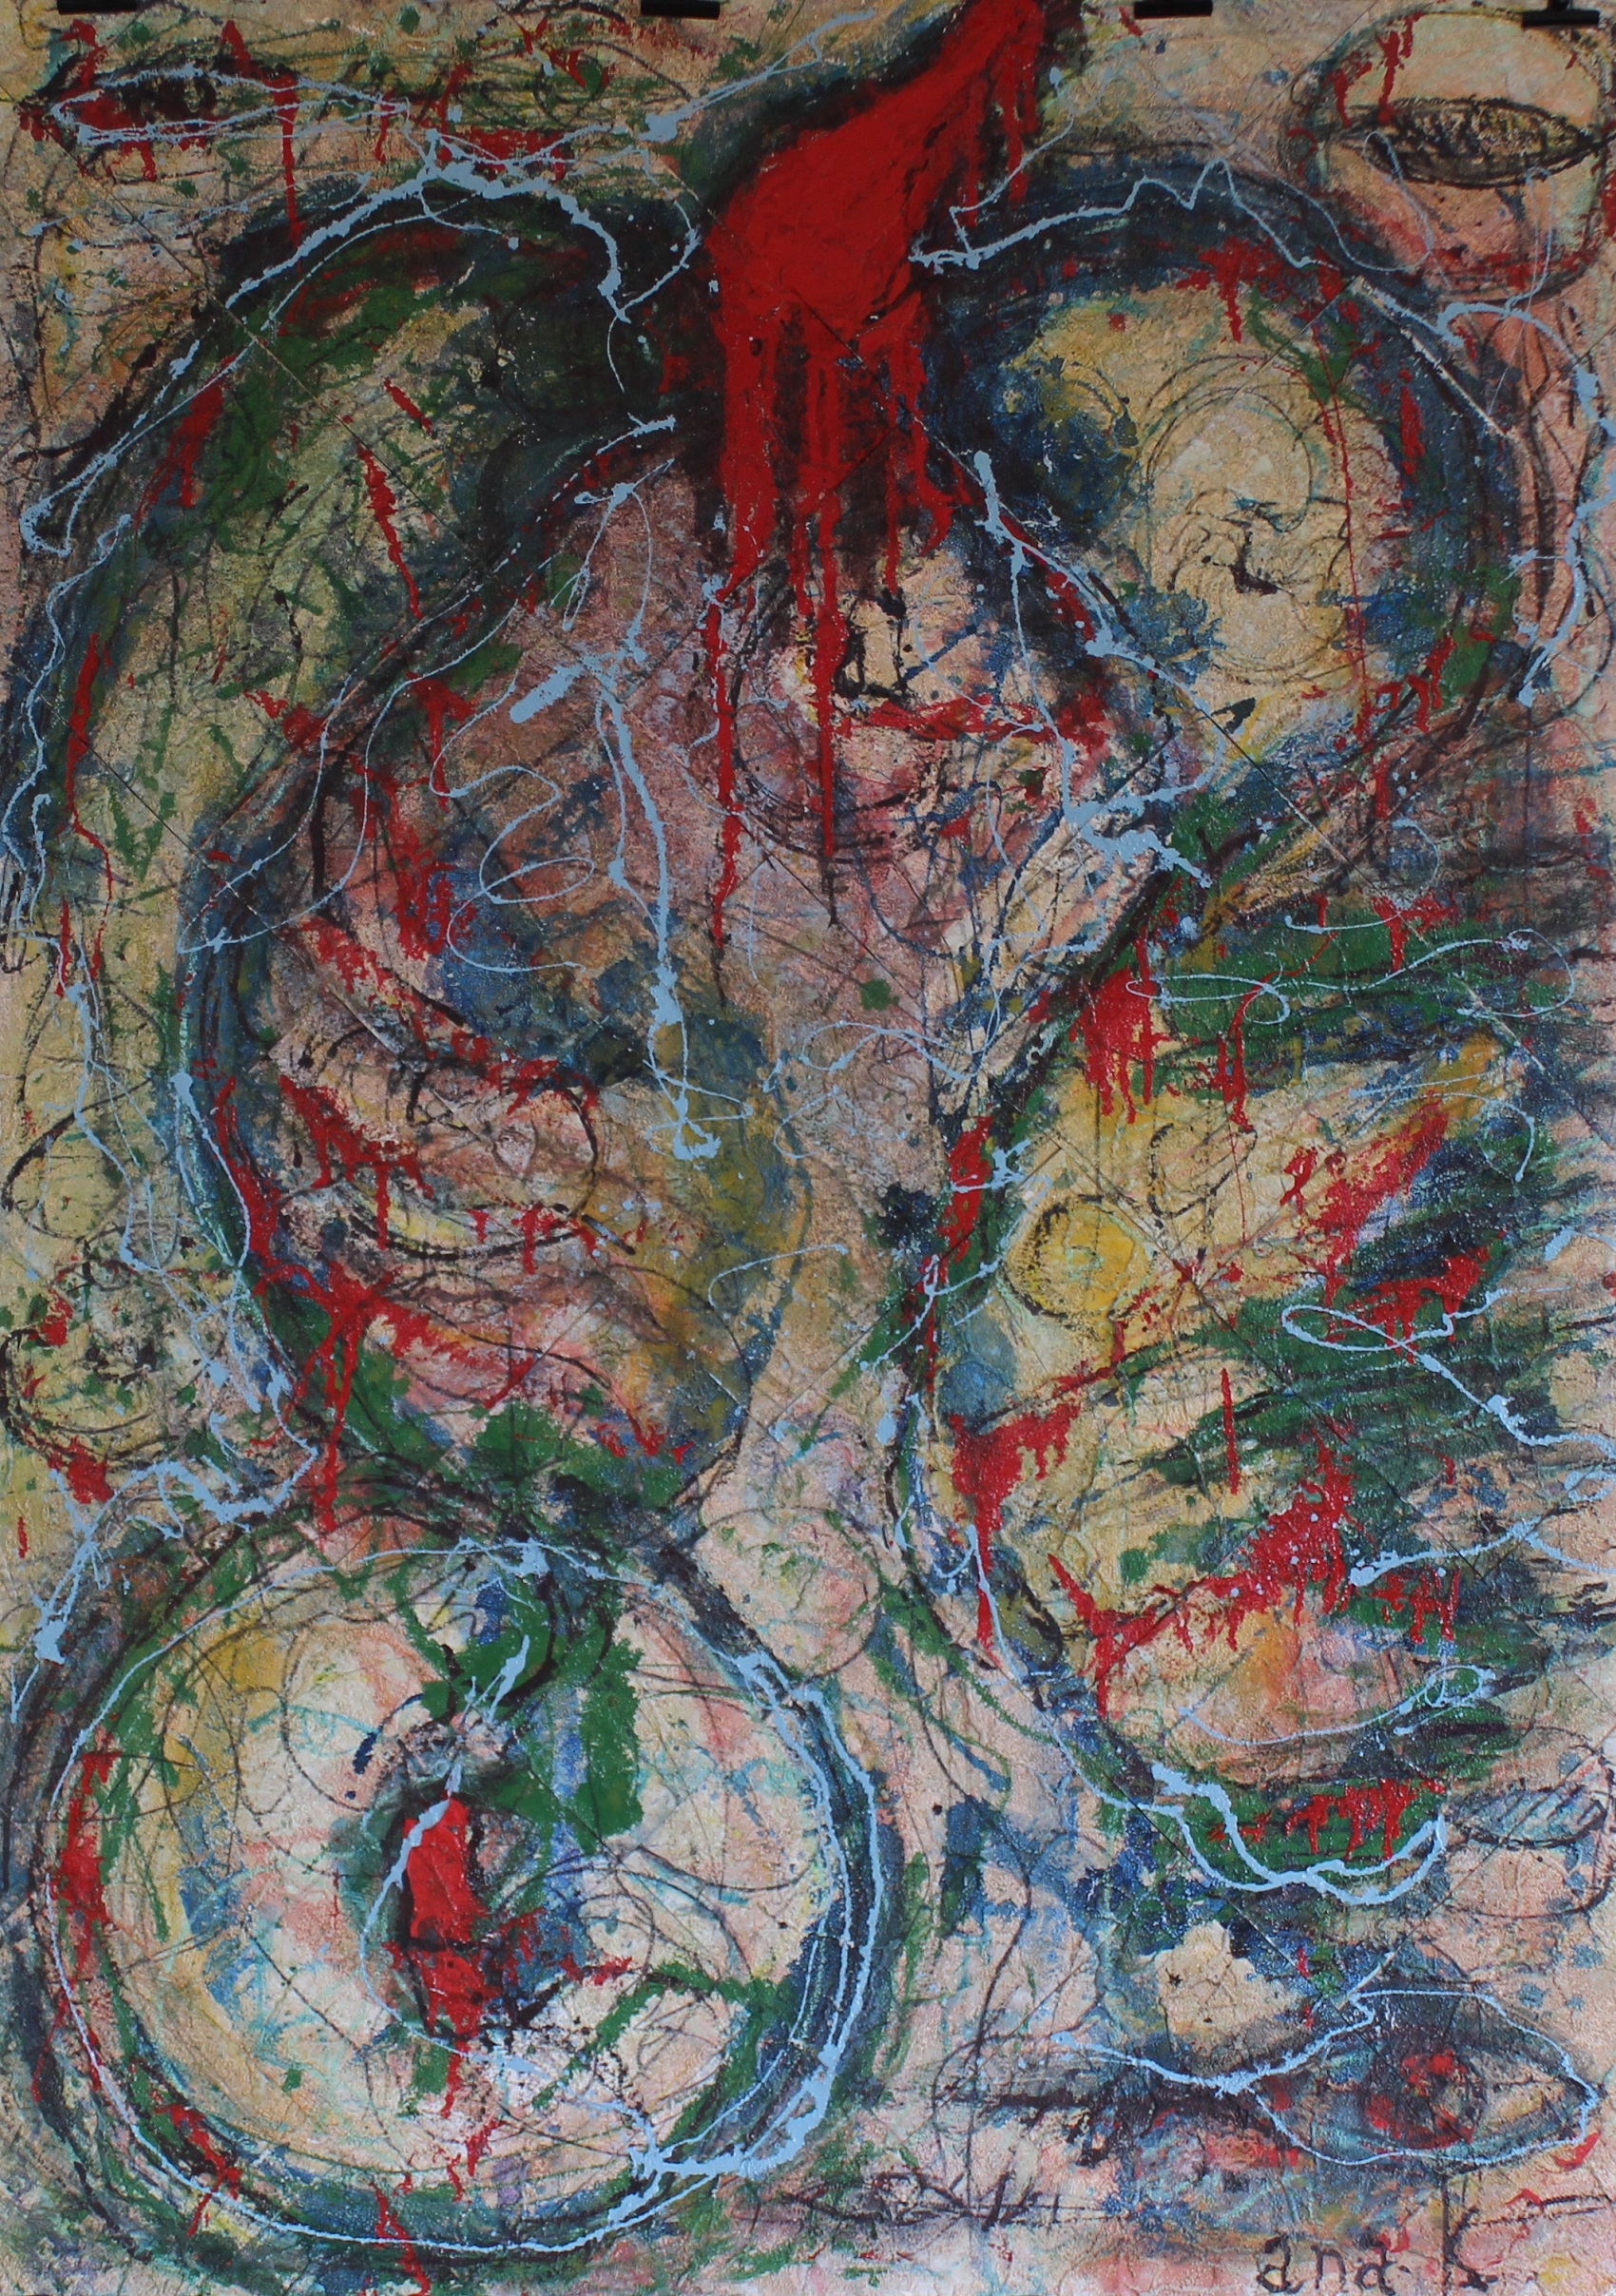 Anger, 107x149 cm, mix media on wallpaper cut-outs, 2002